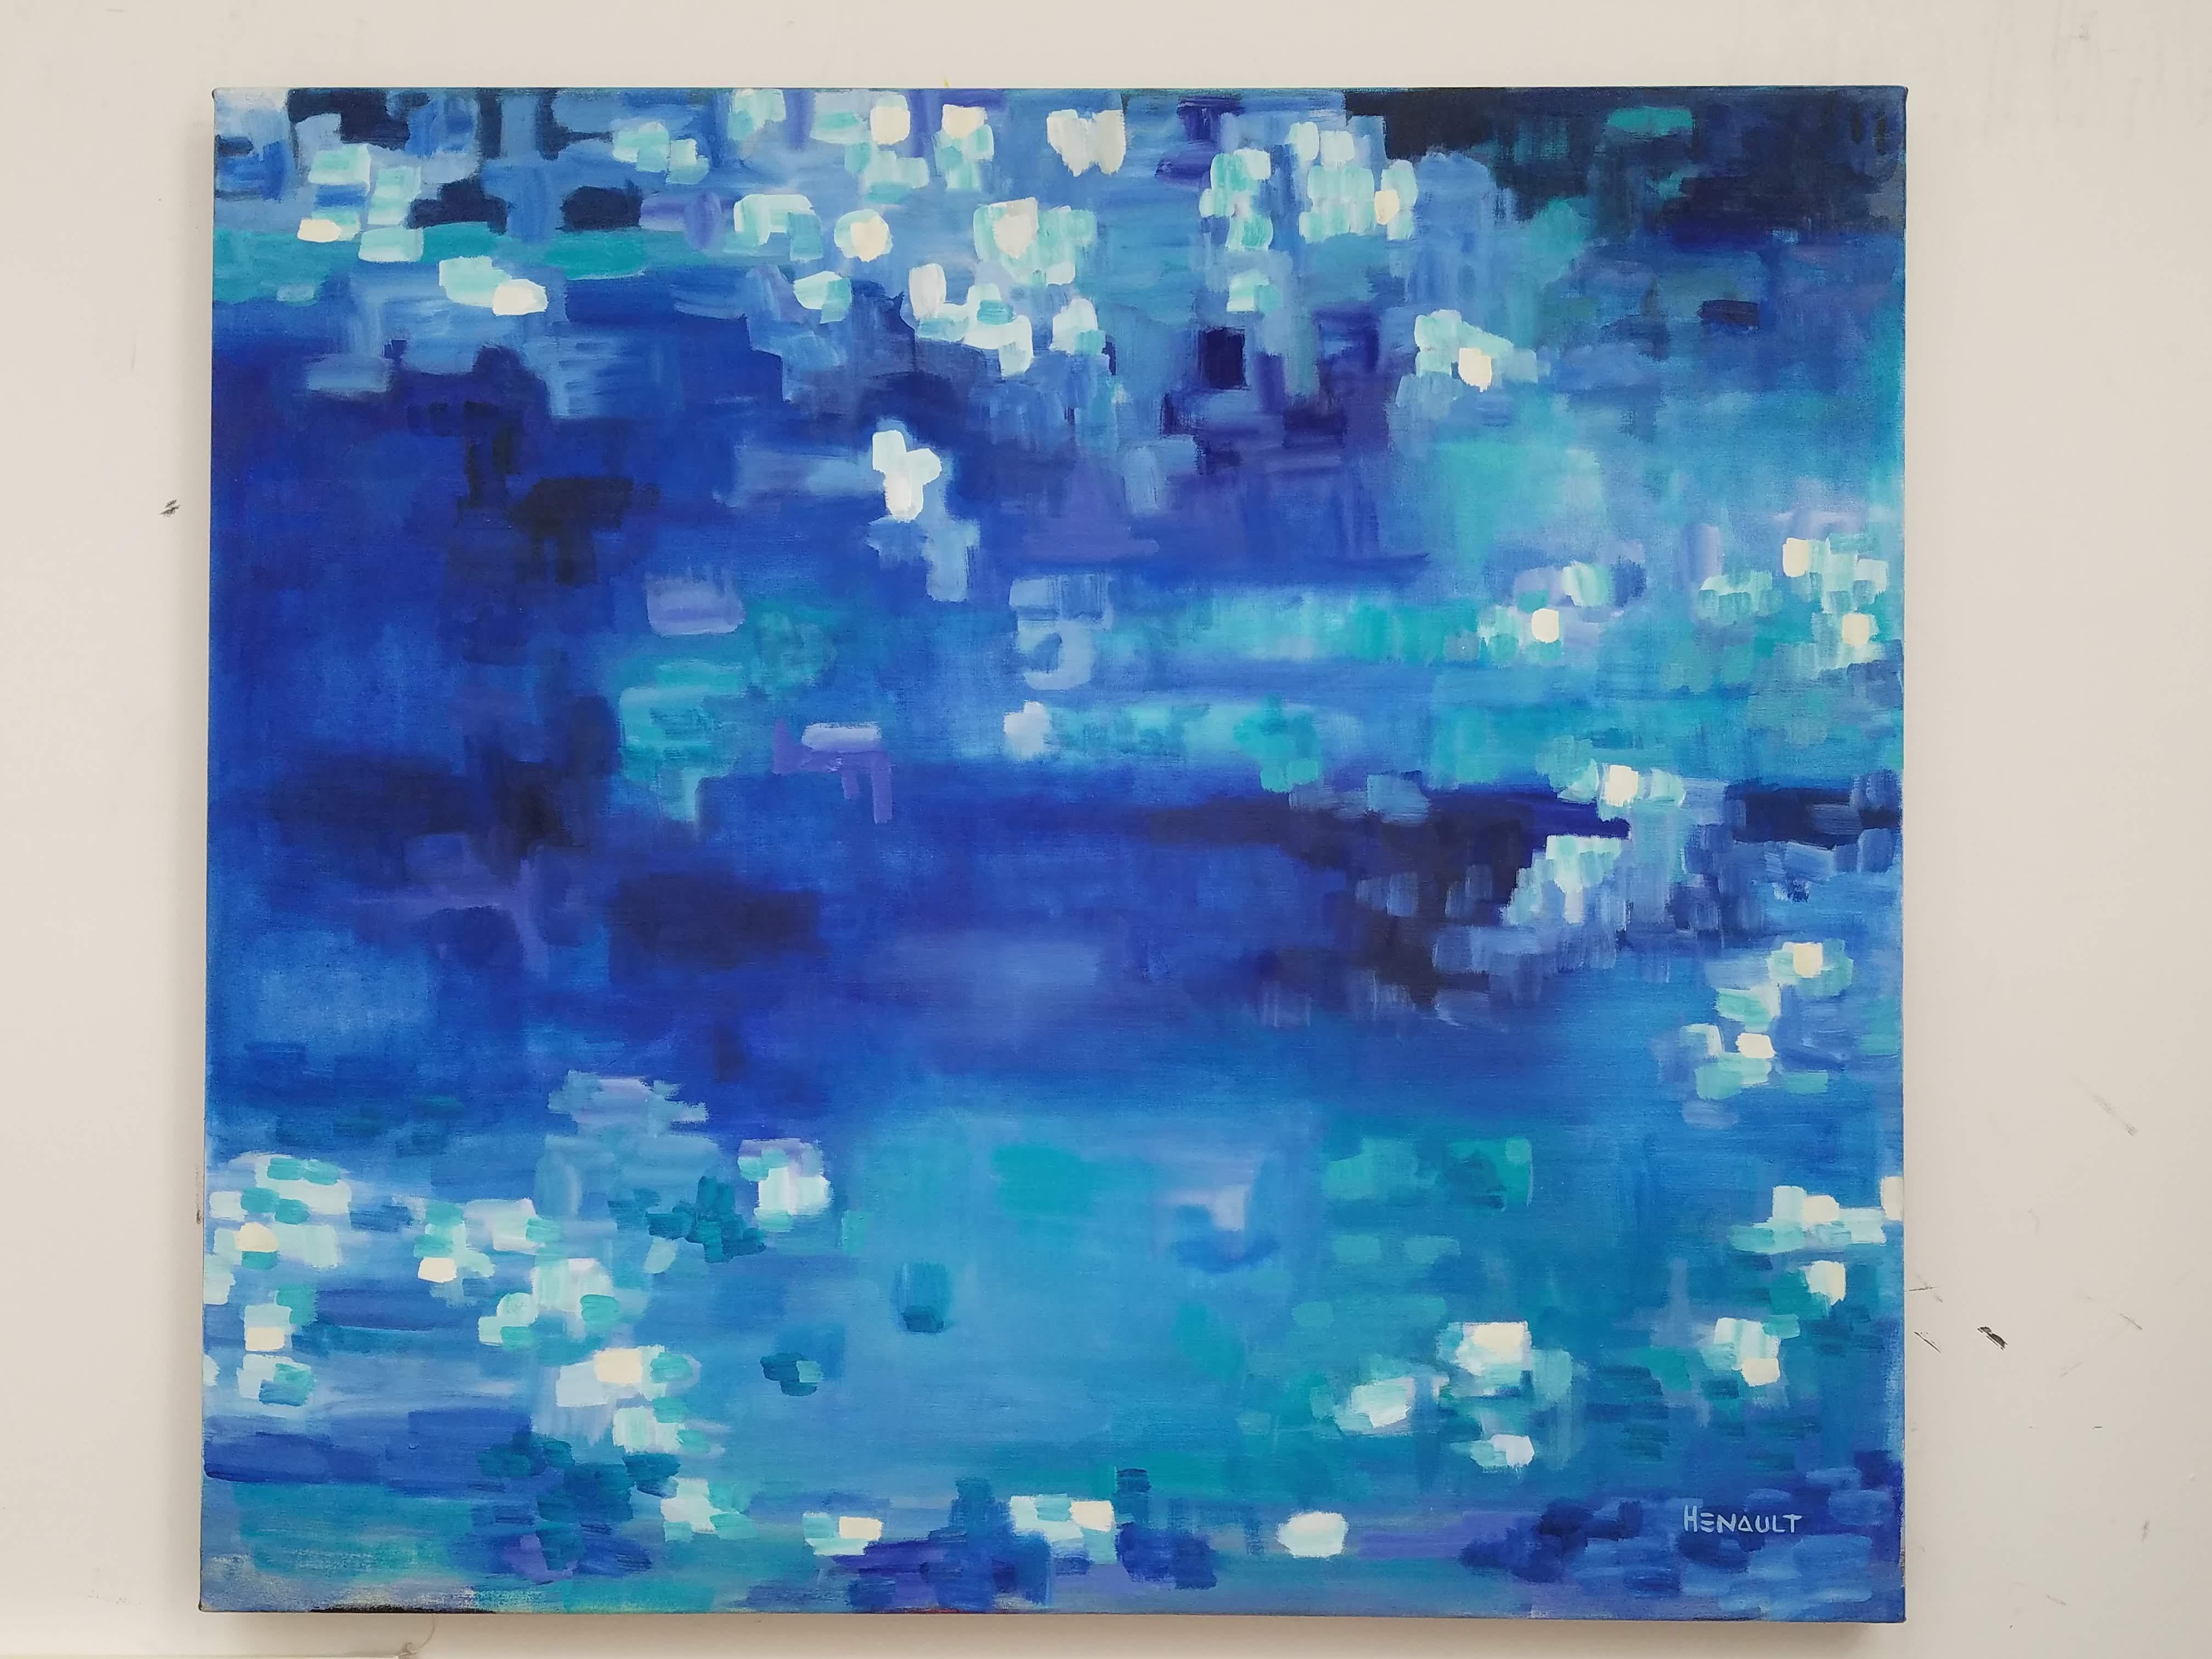 Modern abstract, oil on canvas painting; titled “Le Grand Bleu” by Michelle Hénault, a conceptual fine artist. Signed on front bottom right, also, signed, dated and titled on back; measuring approx. 36